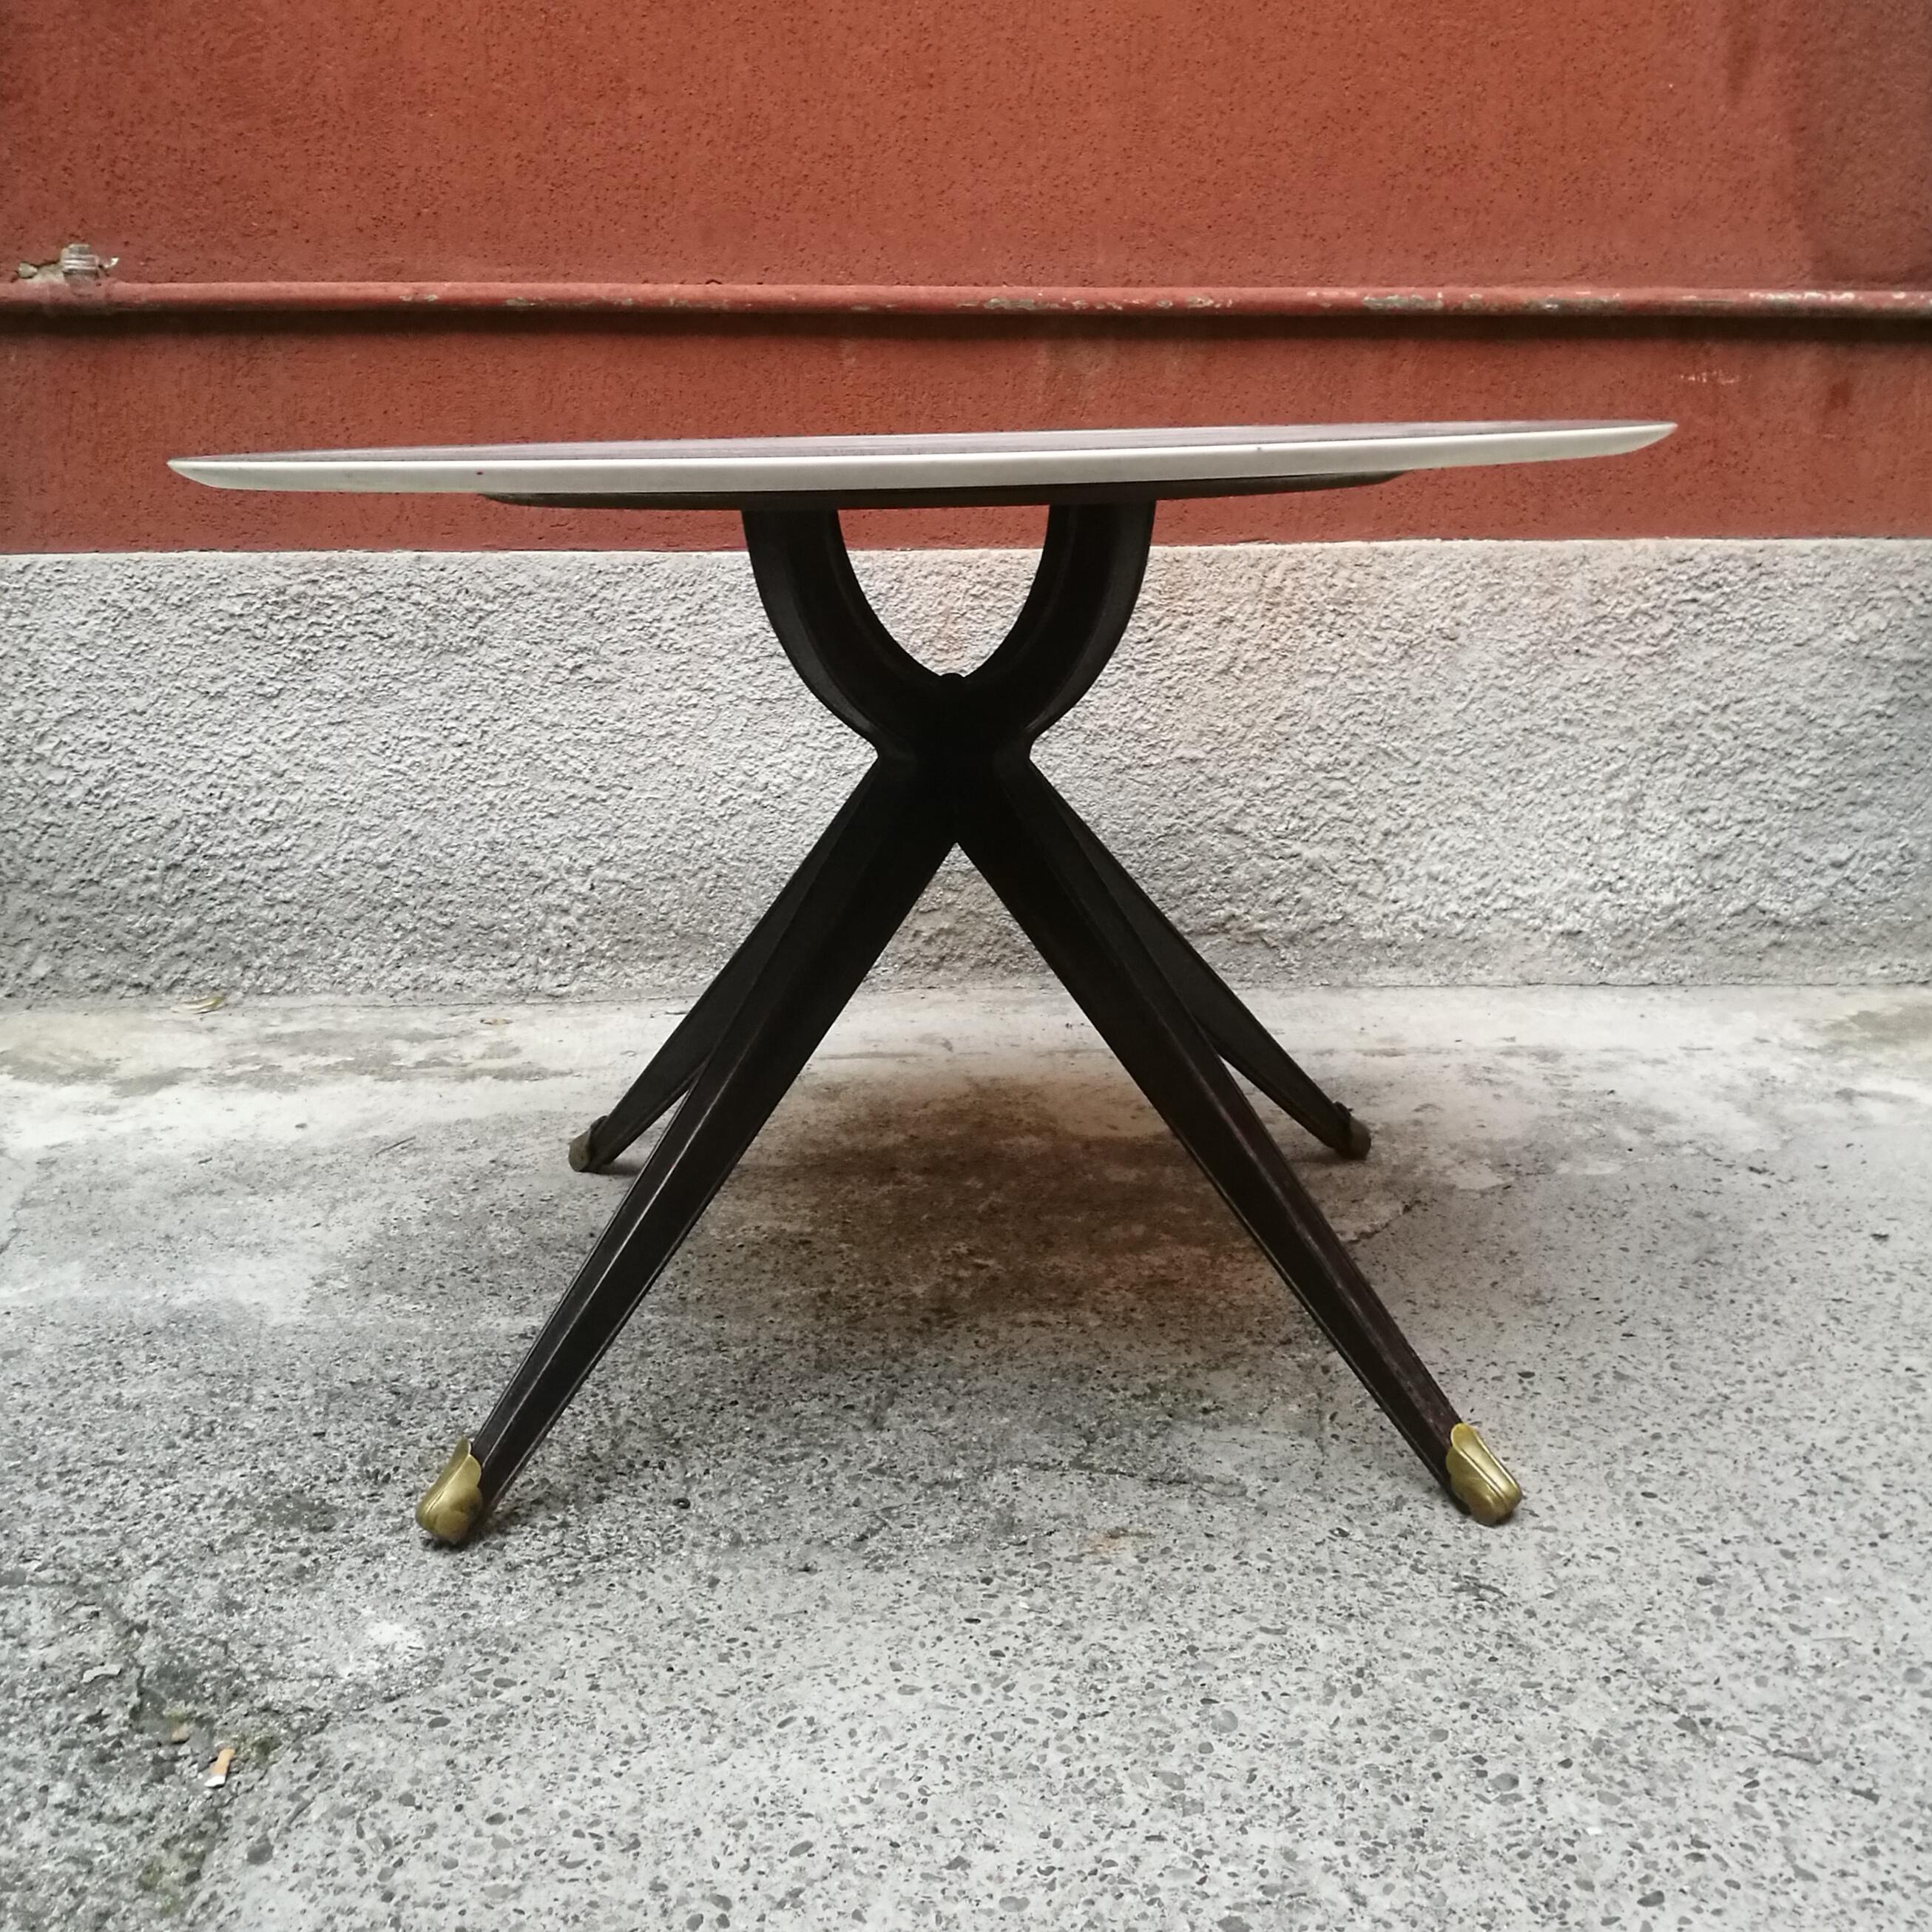 Italian wood and white marble dining table, 1950s
Dining table with statuary marble top and wooden central structure with four legs and brass decoration
Beautiful and in excellent condition.